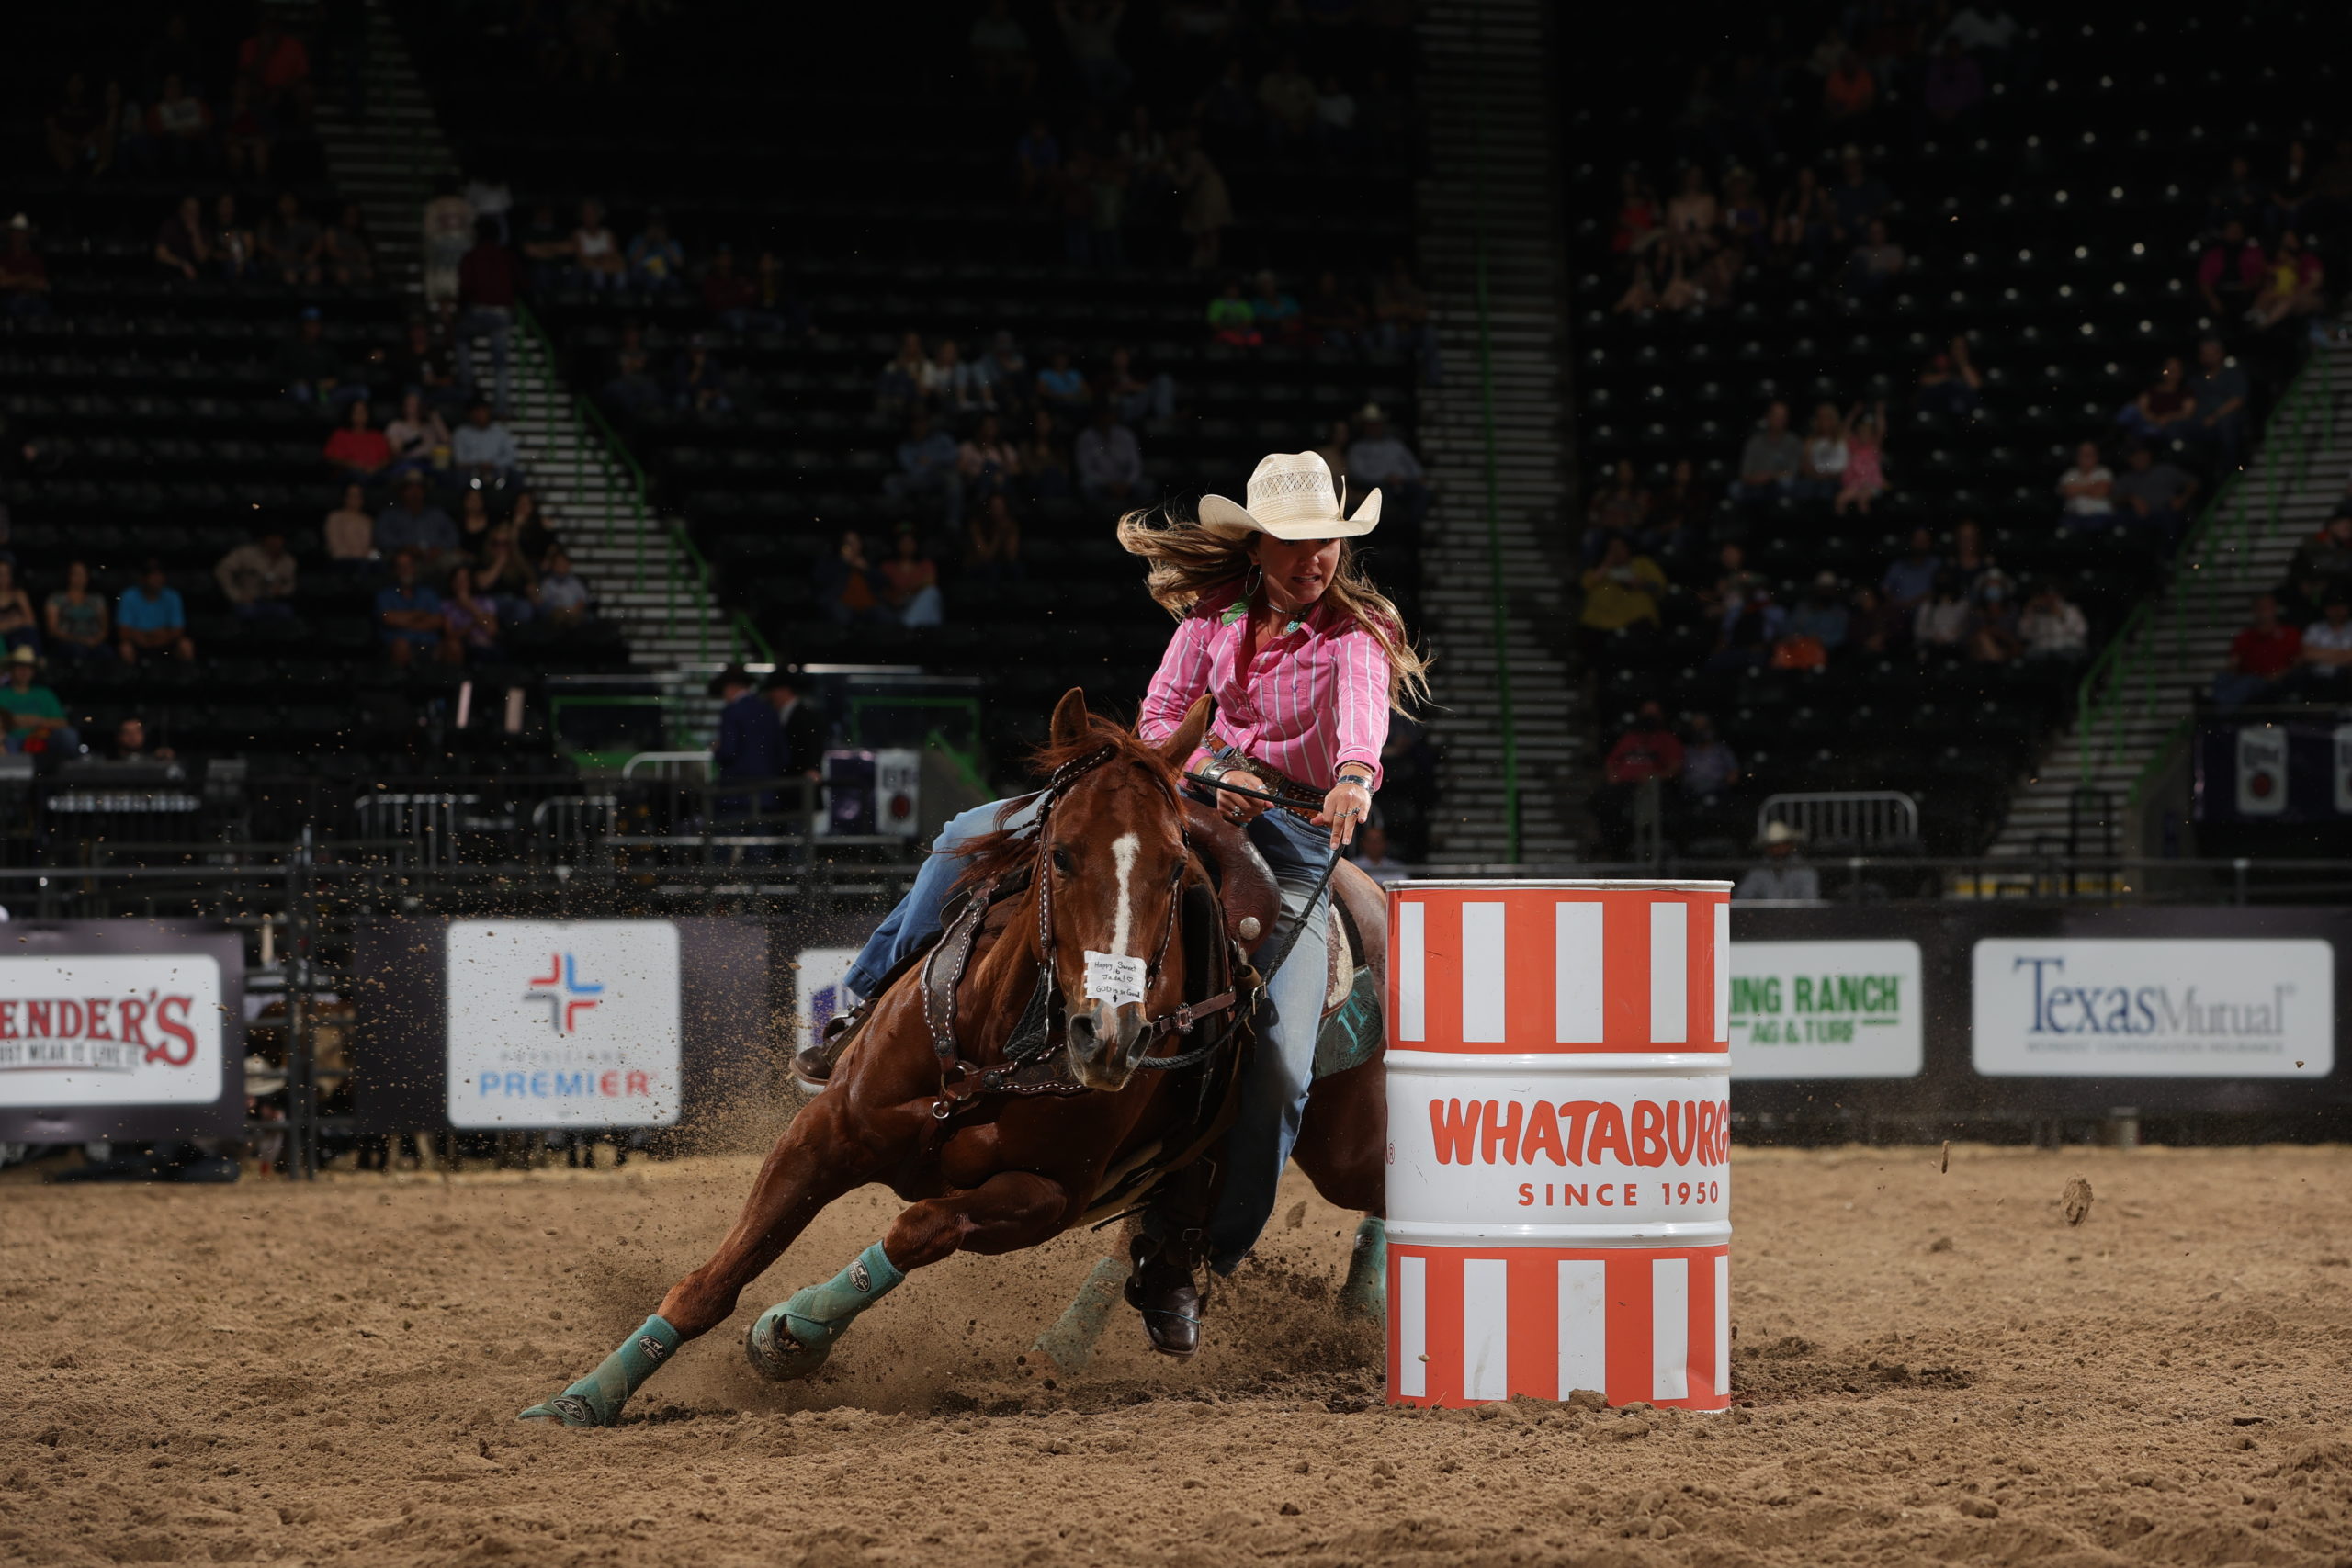  WCRA DIVISION YOUTH AND TEXAS HIGH SCHOOL RODEO ANNOUNCE COLLABORATION 2023 STATE FINALS